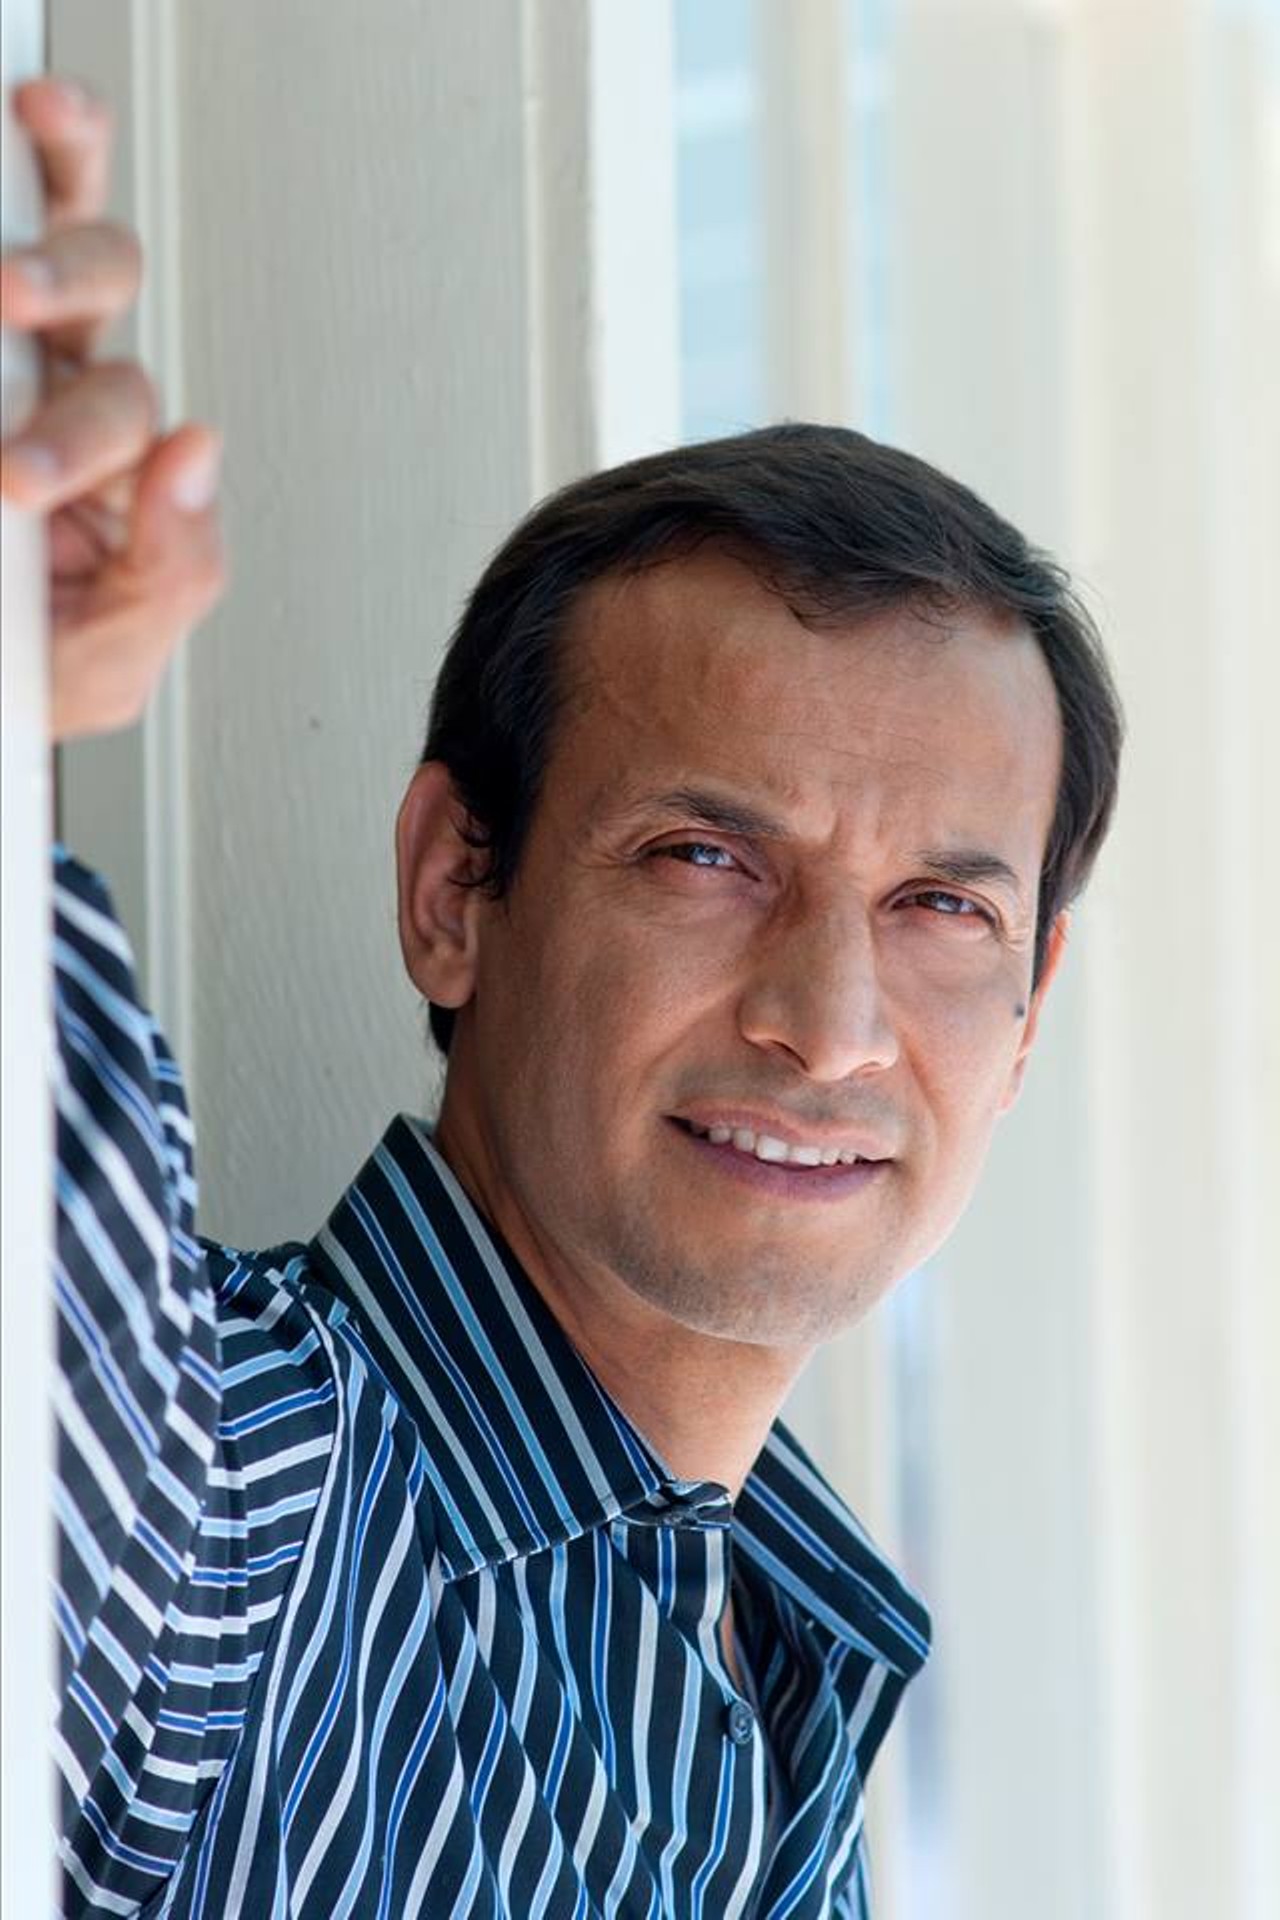 Jesse Borrego
After graduating from Harlandale High School, South Side native Jesse Borrego stuck around the Alamo City to attend the University of the Incarnate Word. While there, he studied theater and dance, which definitely helped him get his first notable role on Fame in the ‘80s.
Photo courtesy of Jesse Borrego